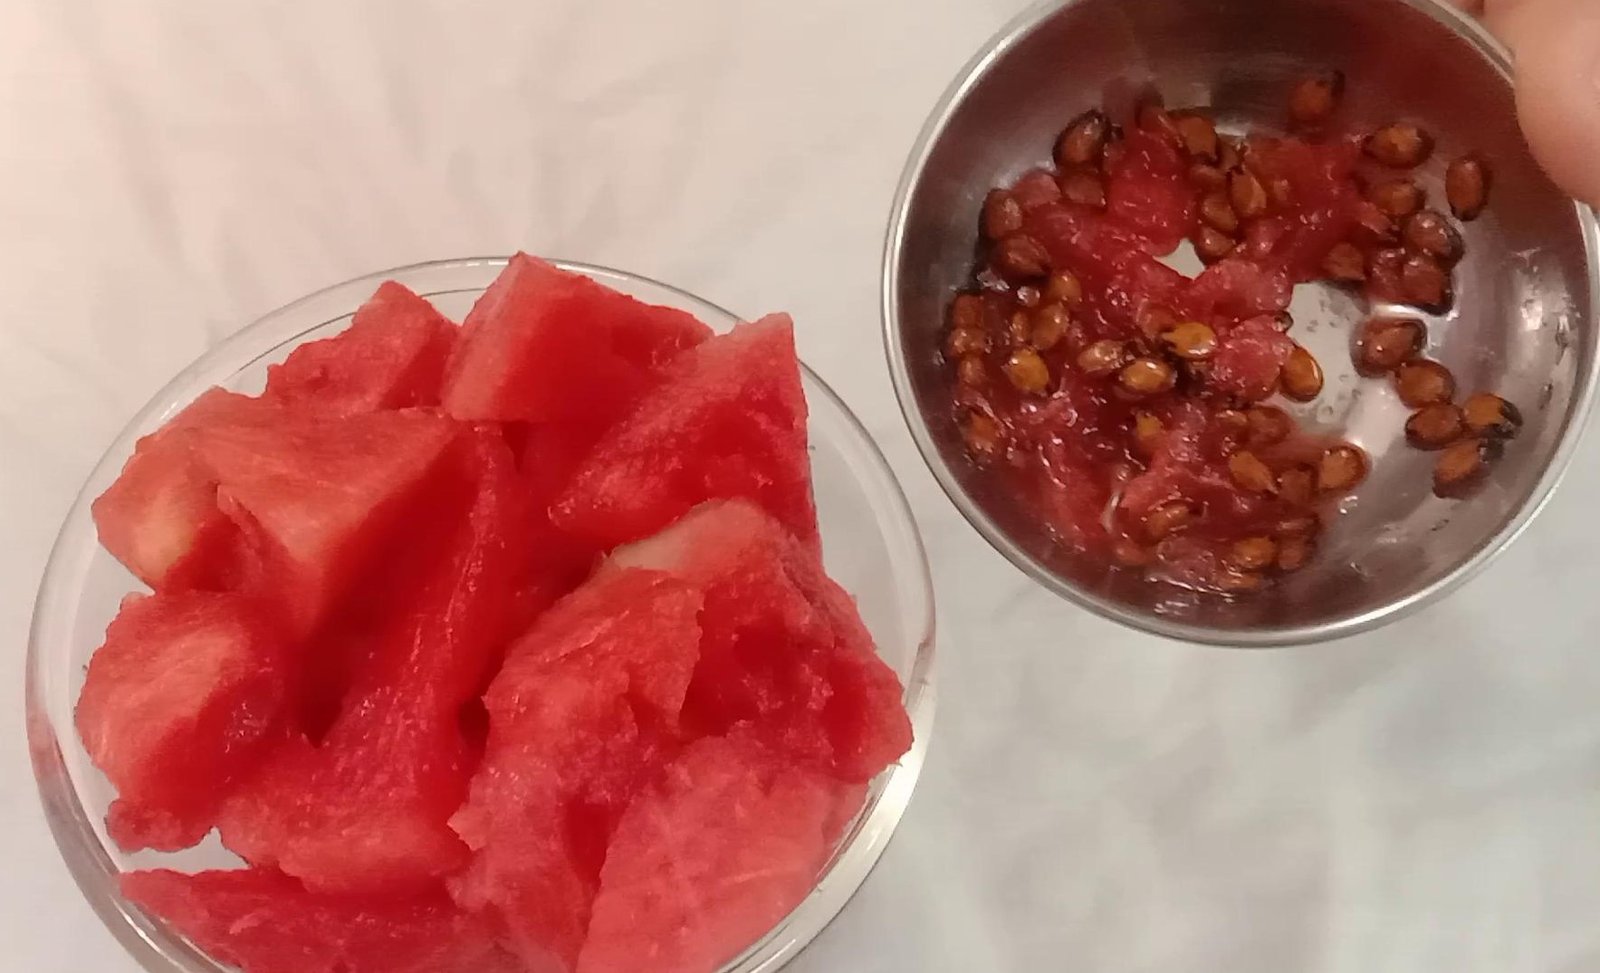 Removing seeds from watermelon, Watermelon Juice.